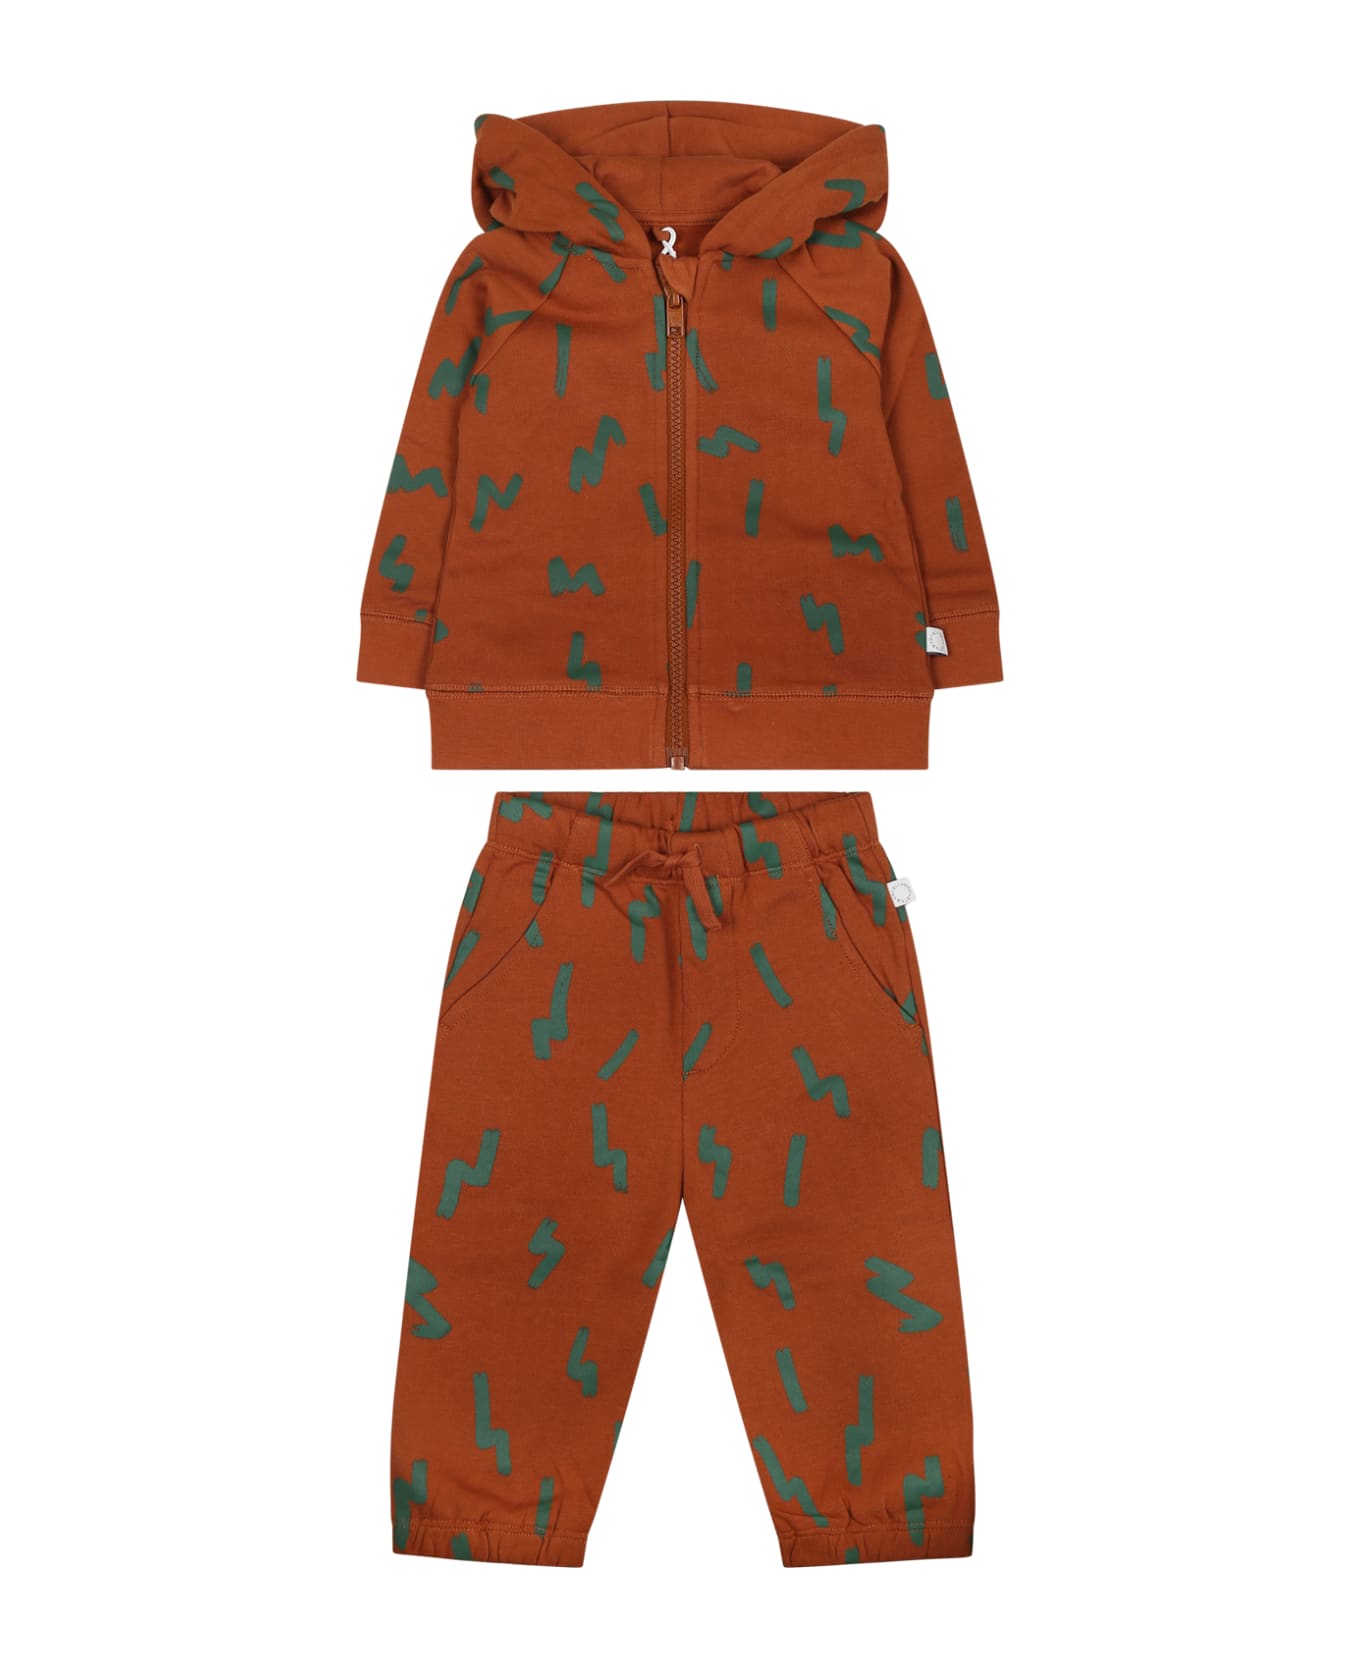 Stella McCartney Kids Beige Suit For Baby Boy With Print - Brown ボトムス